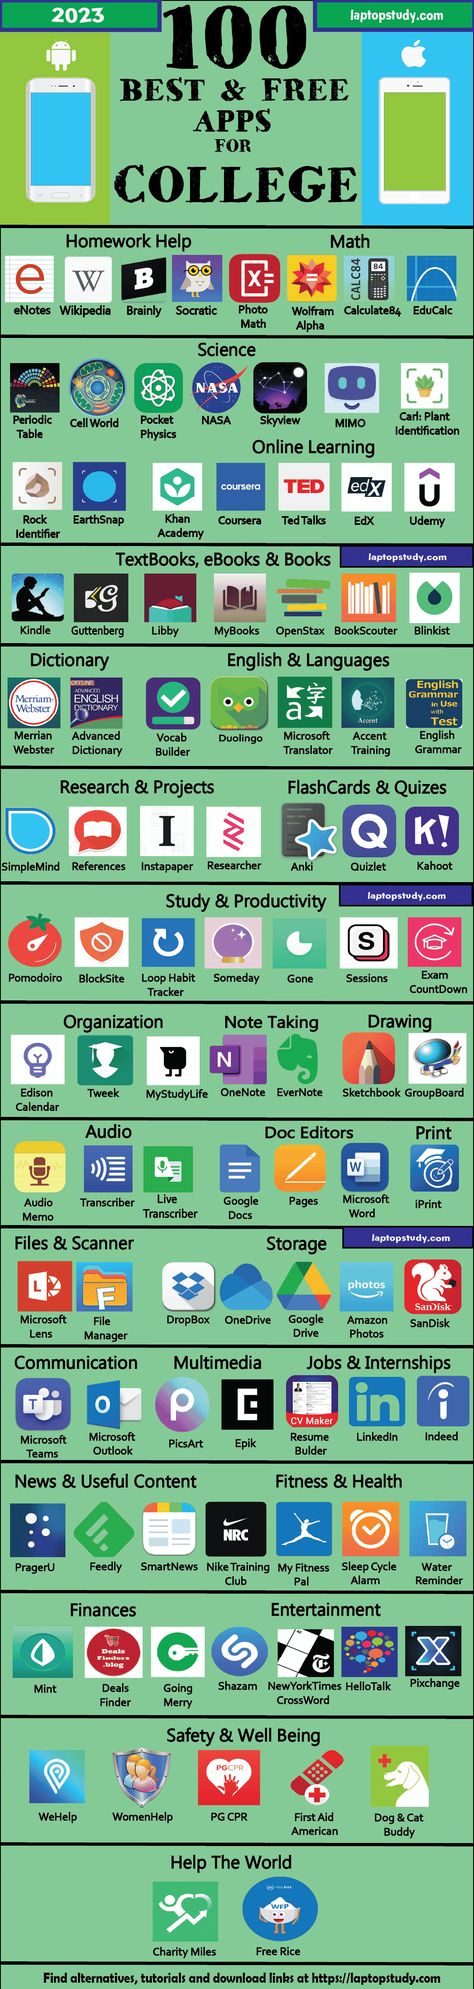 App For Students College, Apps For Research, Study Pack Apps Android, Computer Basics How To Use, App For College Students, Apps Useful For Students, Sites For College Students, Mac Apps For College Students, My Study Life App